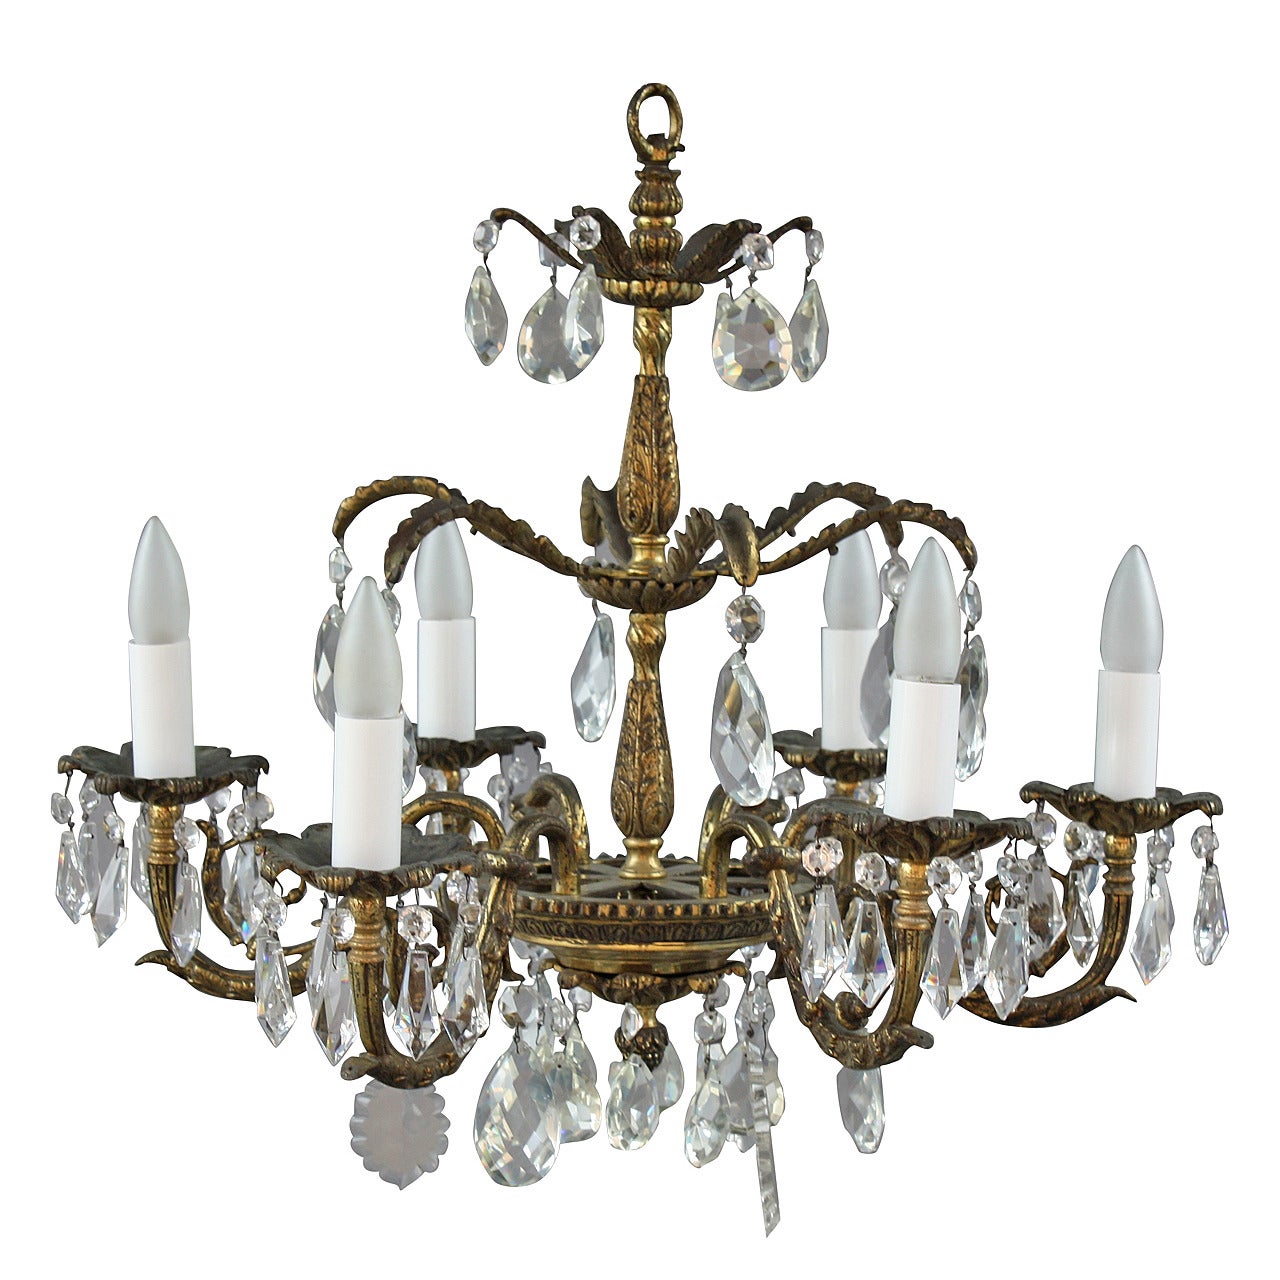 Antique One of Two Brass and Crystal Chandeliers, circa 1930s